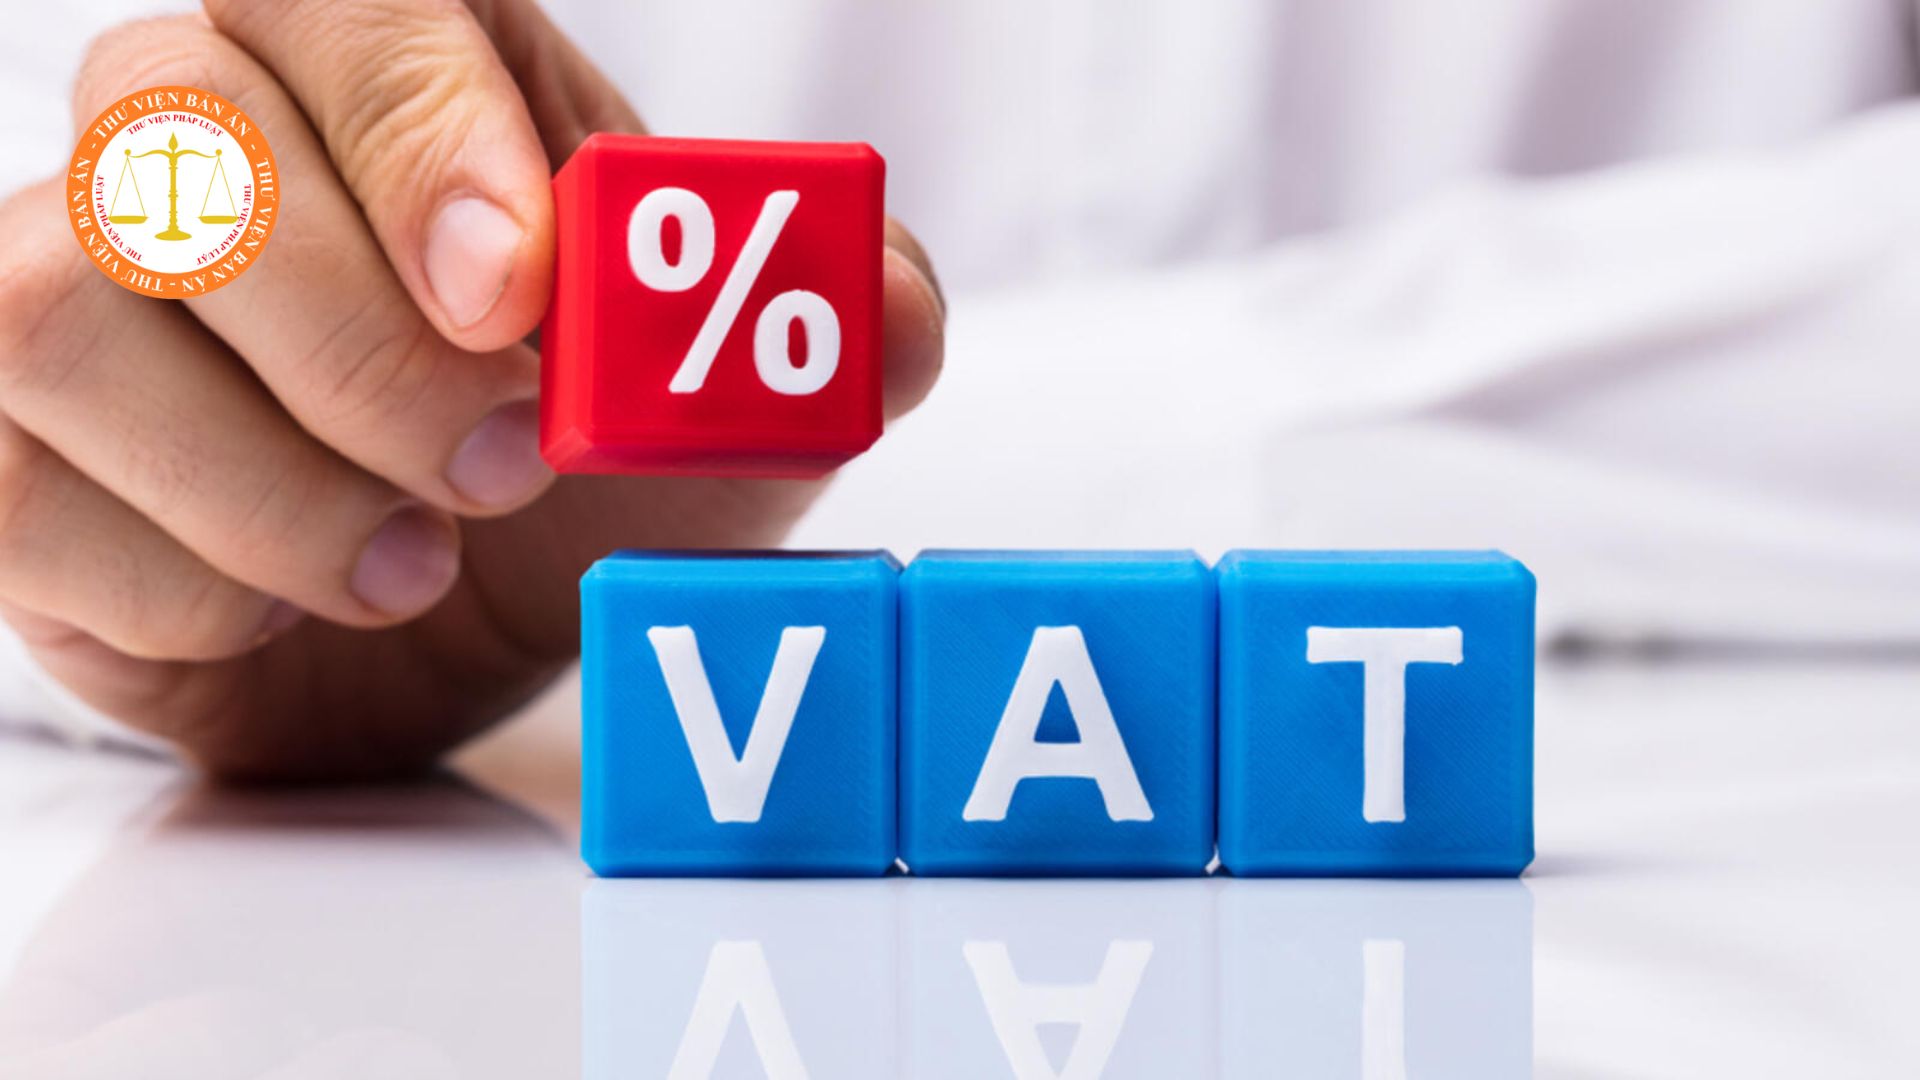 List of goods and services subject to 5% and 10% VAT in Vietnam